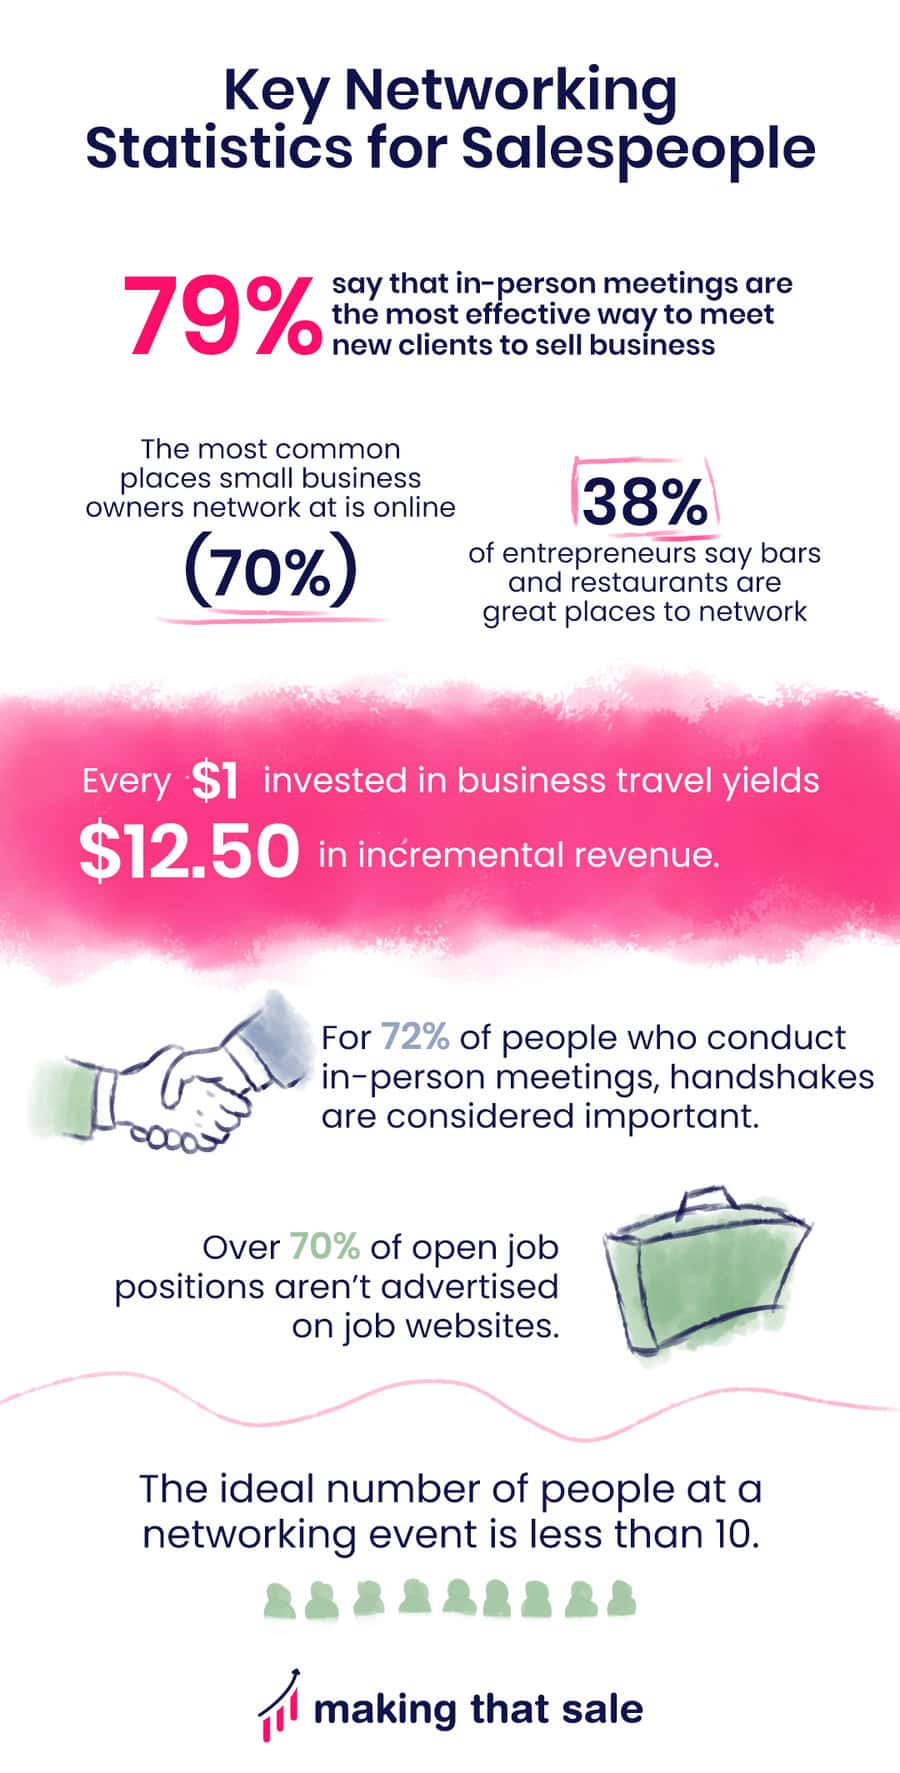 Key Networking Statistics for Salespeople